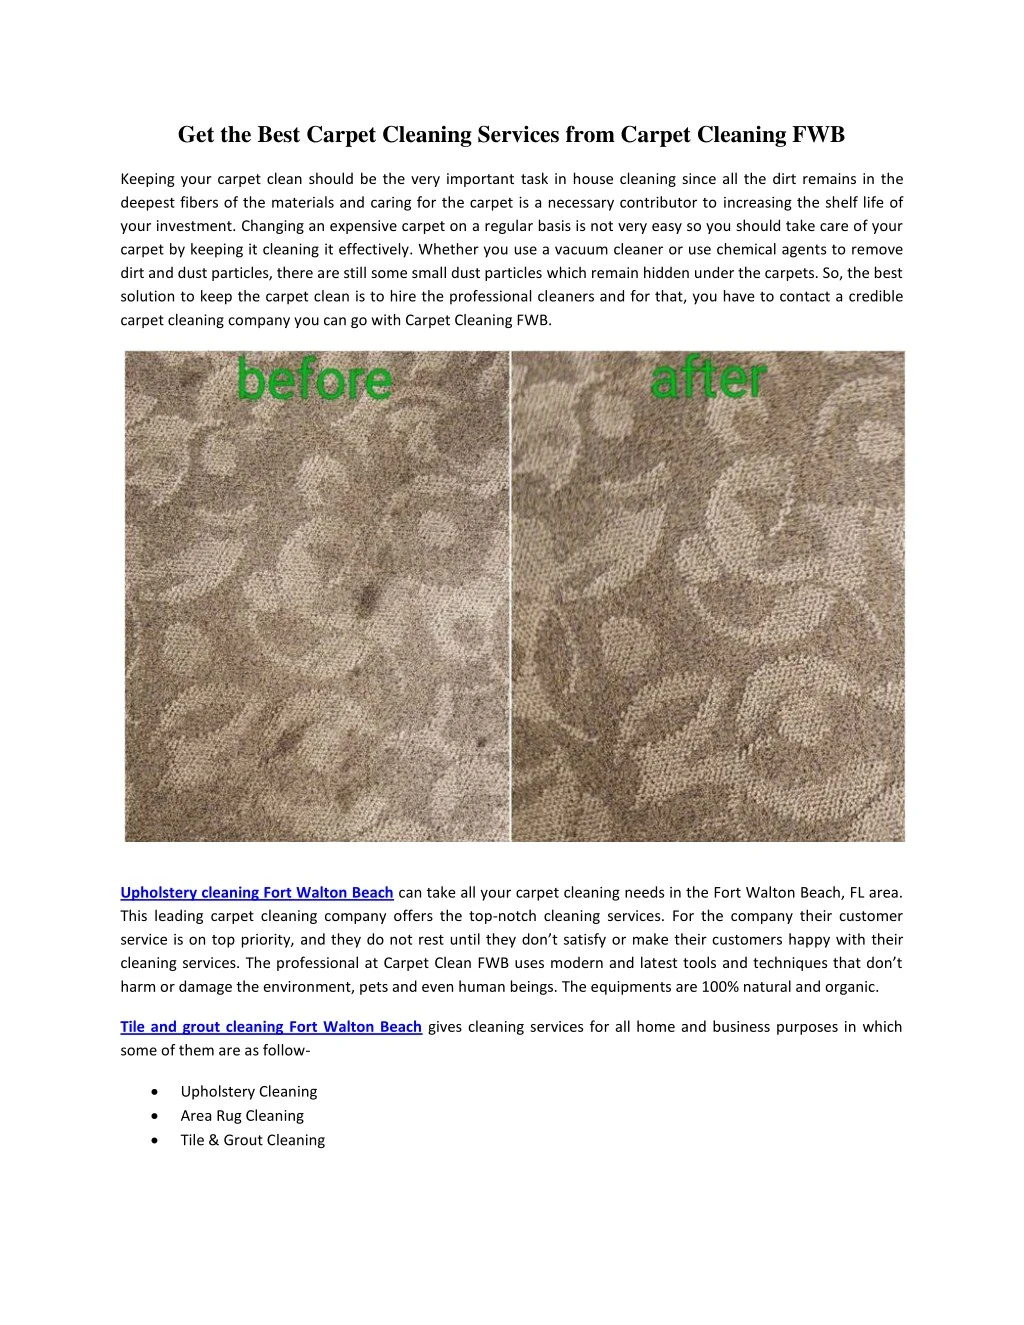 get the best carpet cleaning services from carpet